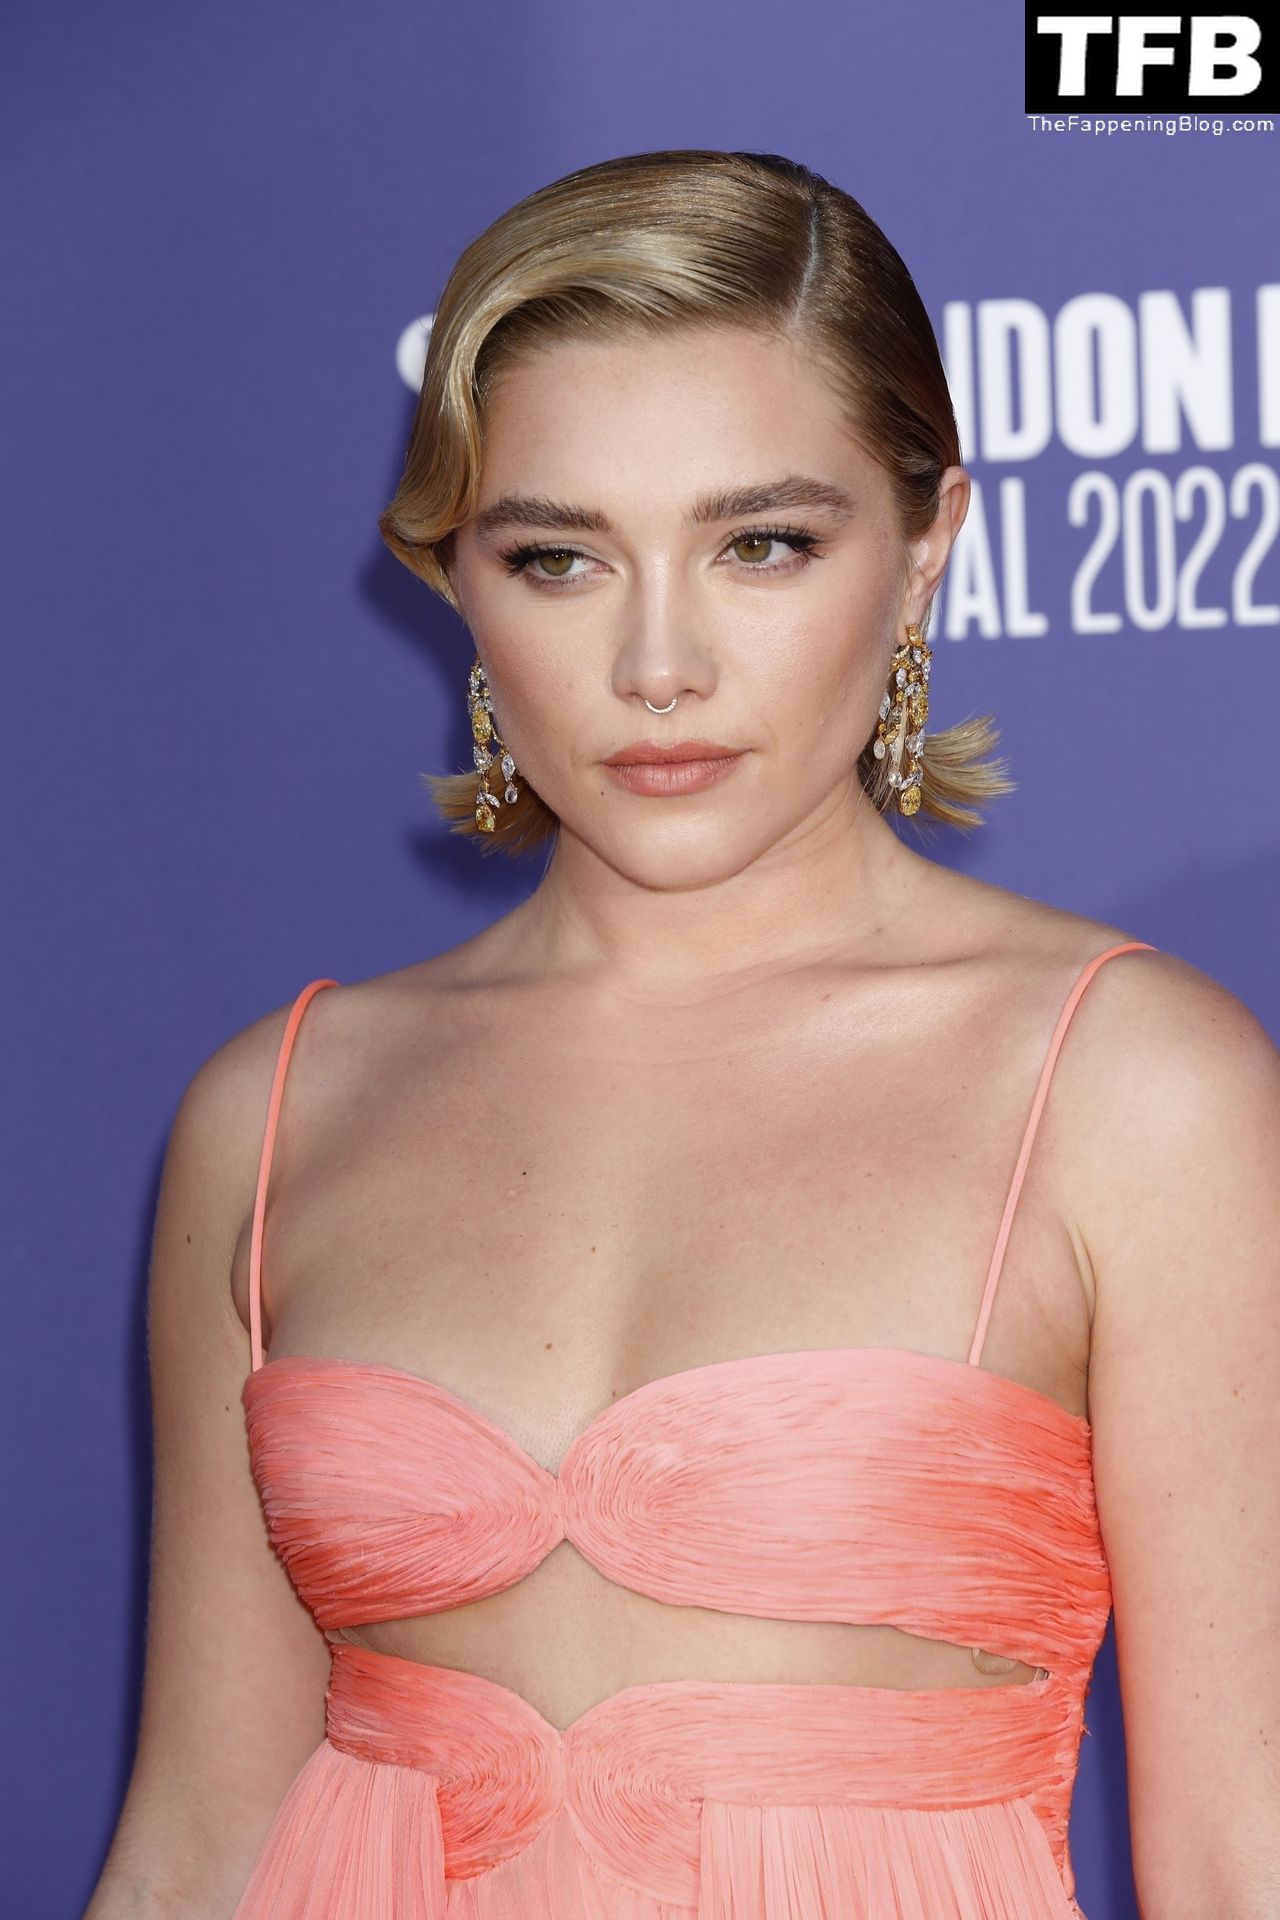 Florence-Pugh-Sexy-The-Fappening-Blog-98.jpg